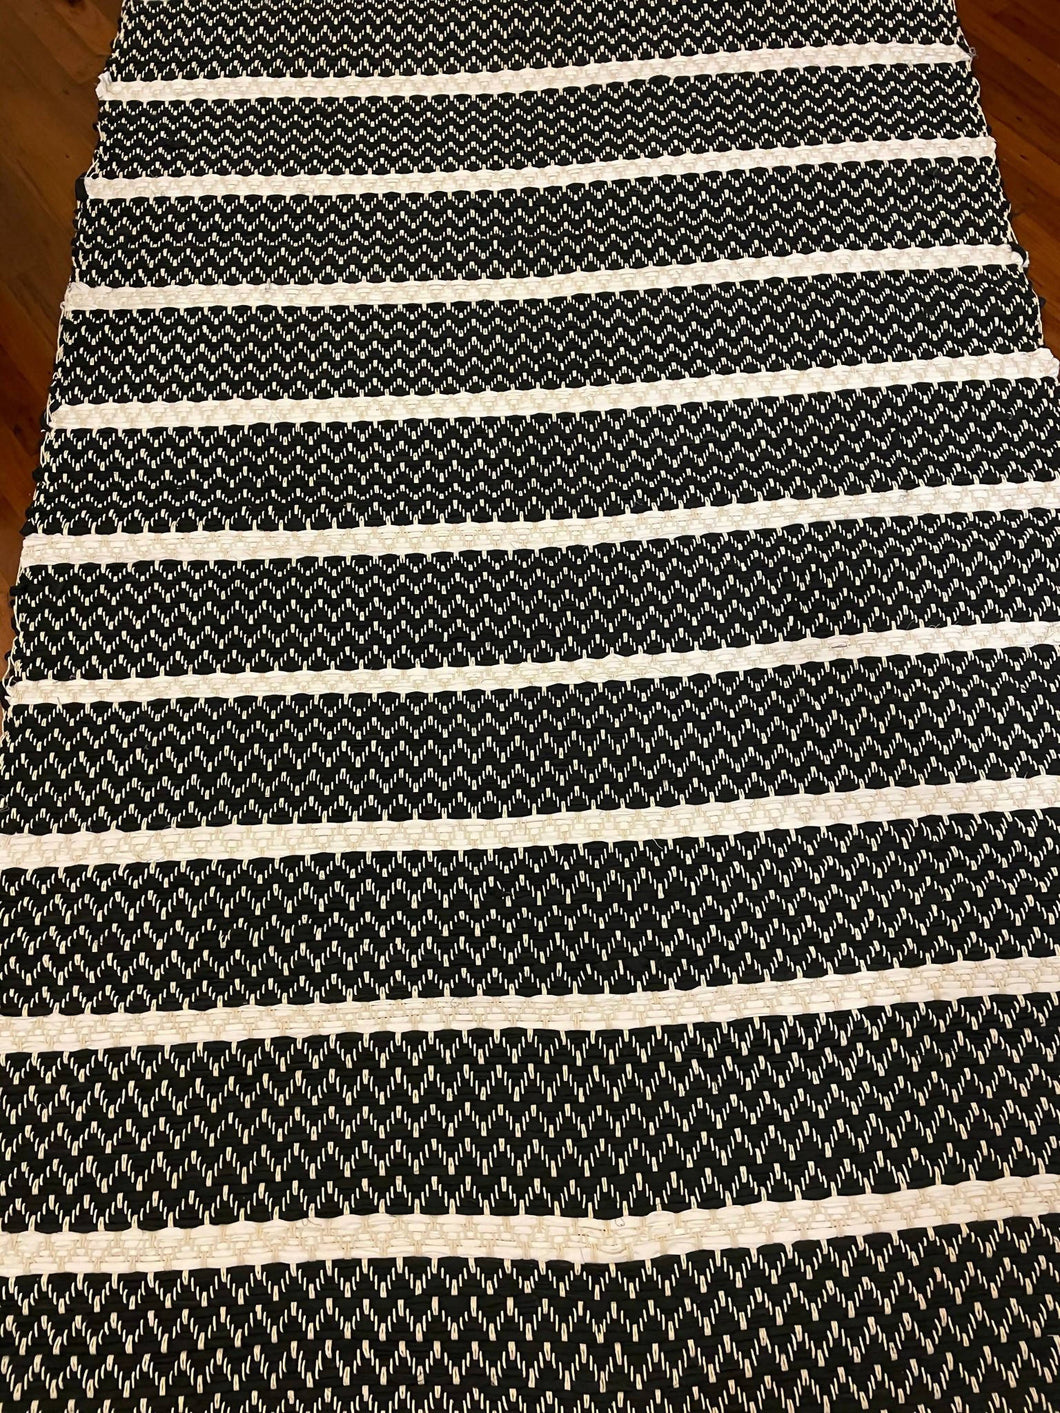 Black & White Recycled, Handwoven Rug - 4’x7’